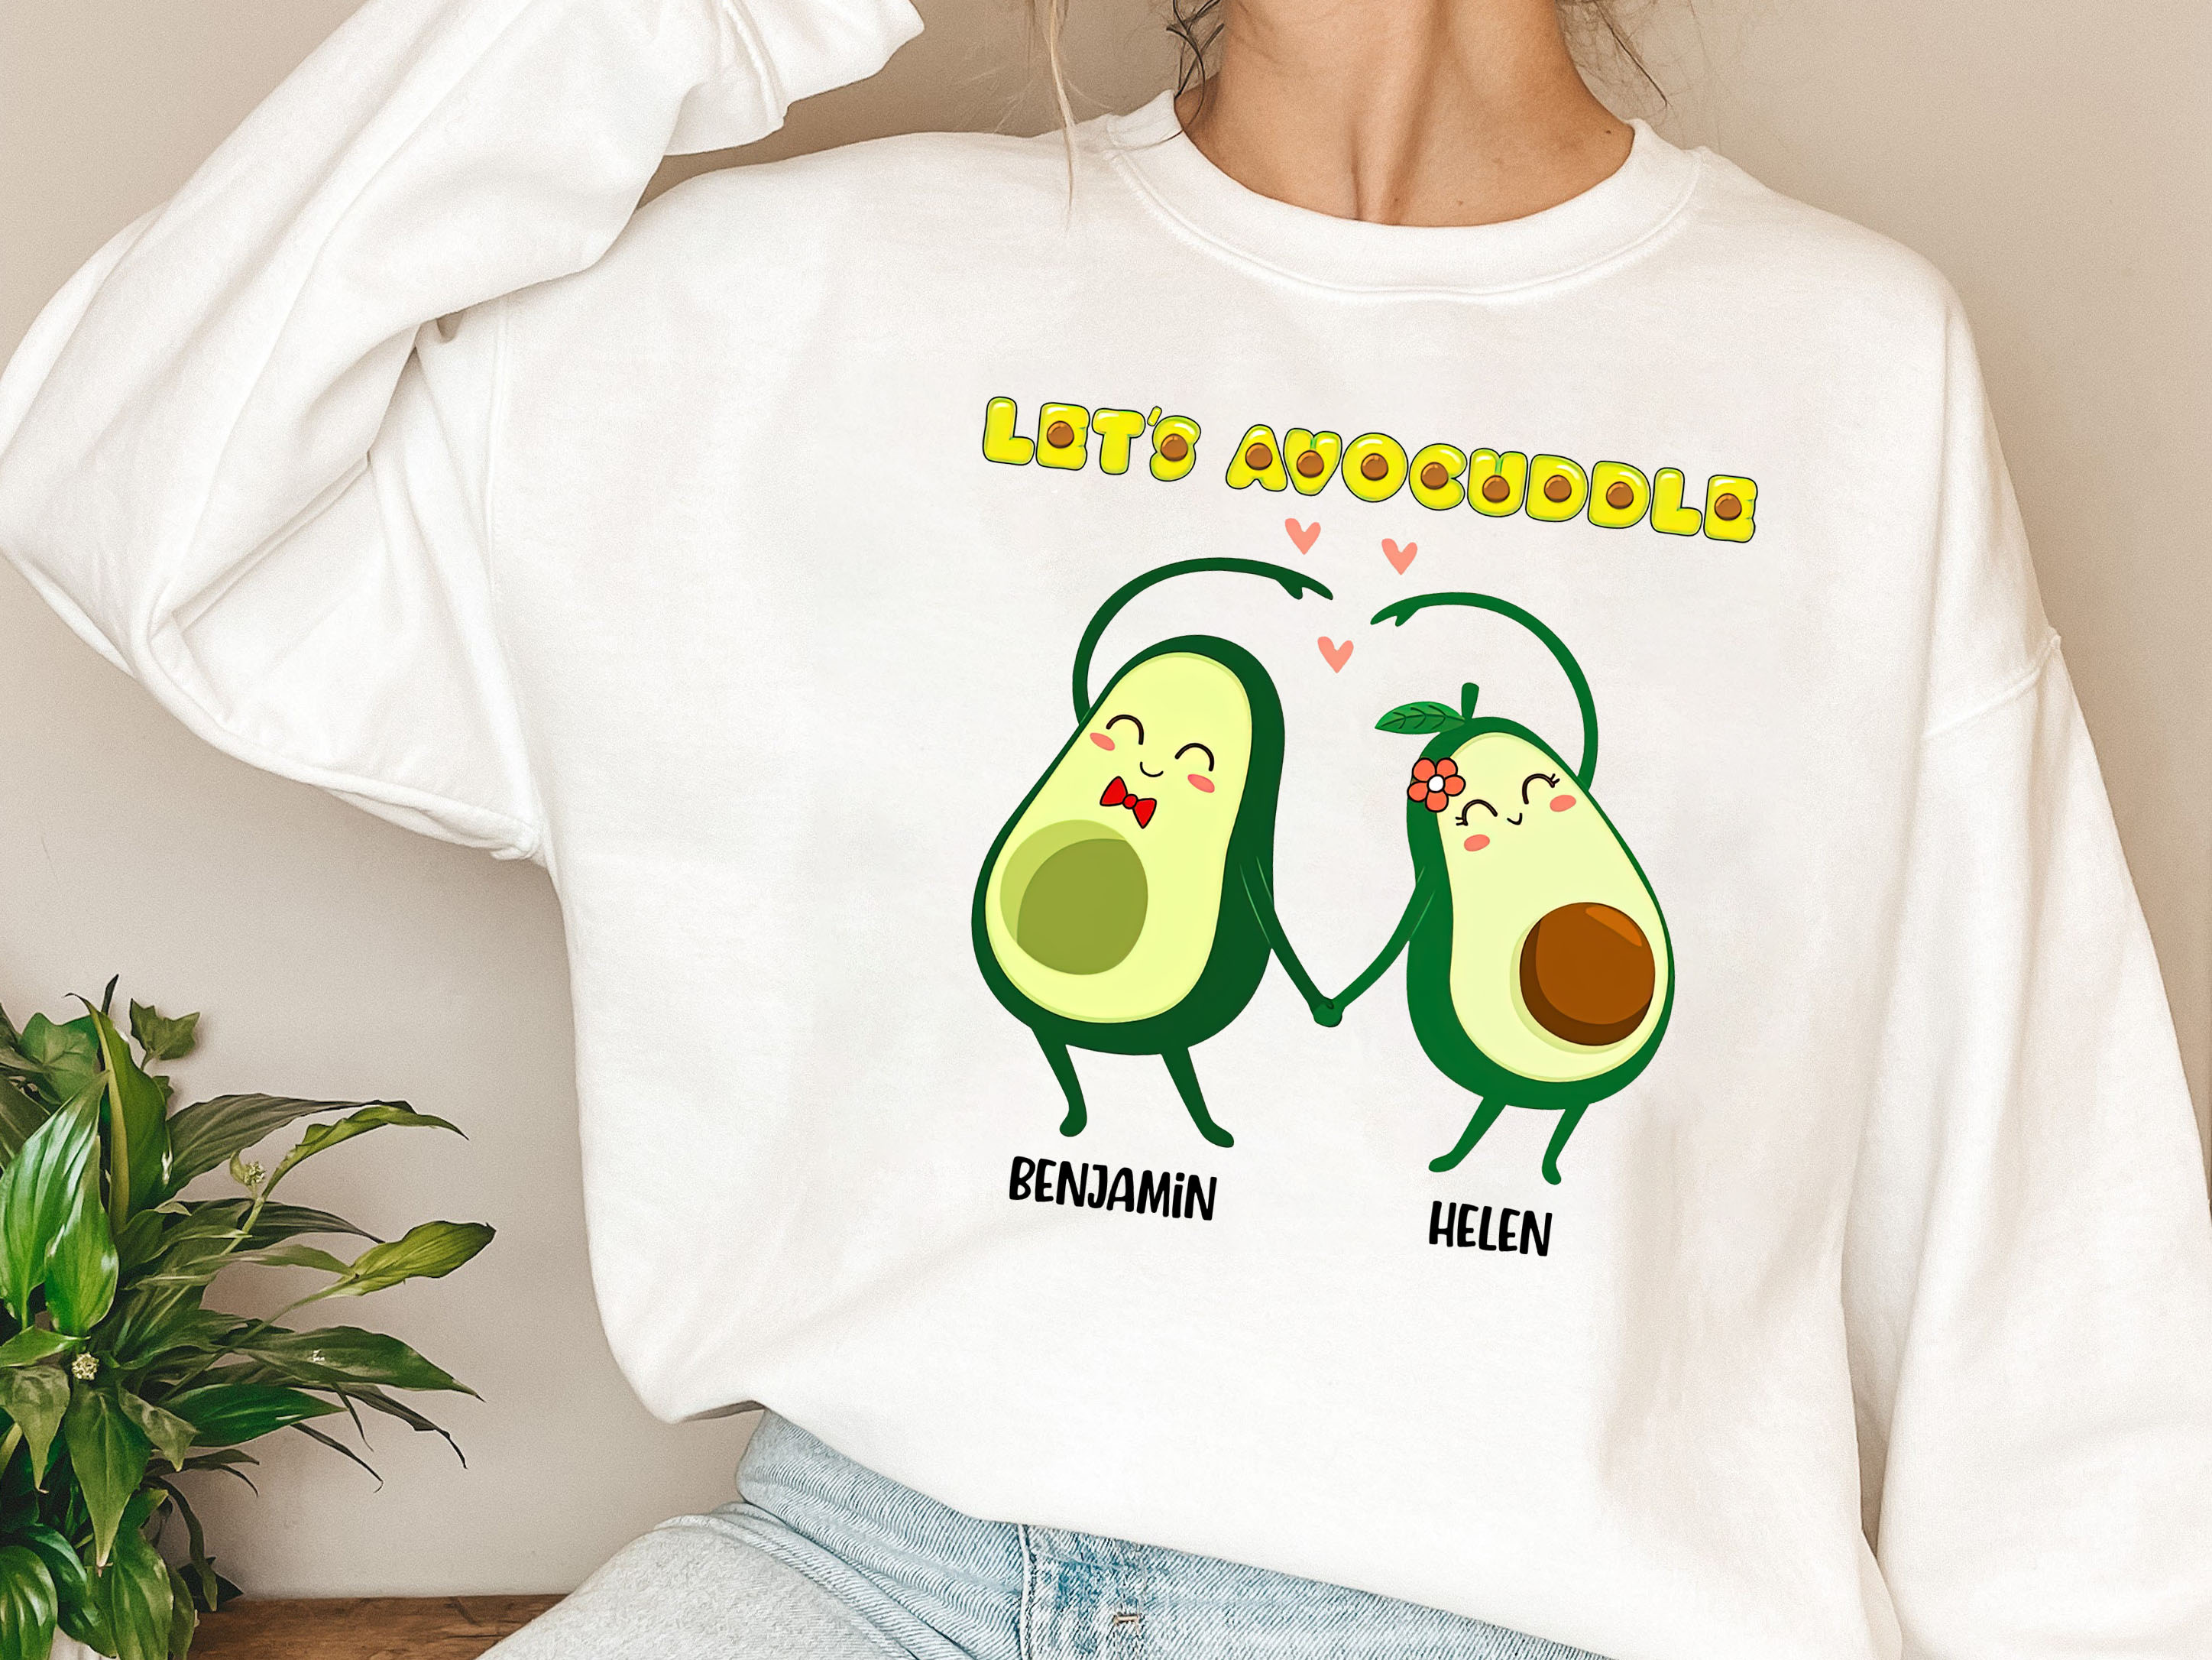 https://www.buytshirtdesigns.net/wp-content/uploads/2022/12/Personalized-Lets-Avocuddle-Couple-Matching-Valentine_s-day-Gift-Couple-Avocado-Funny-Avocado-Gift-For-Her-Gift-For-Him-PNG-File-TL-6.jpg